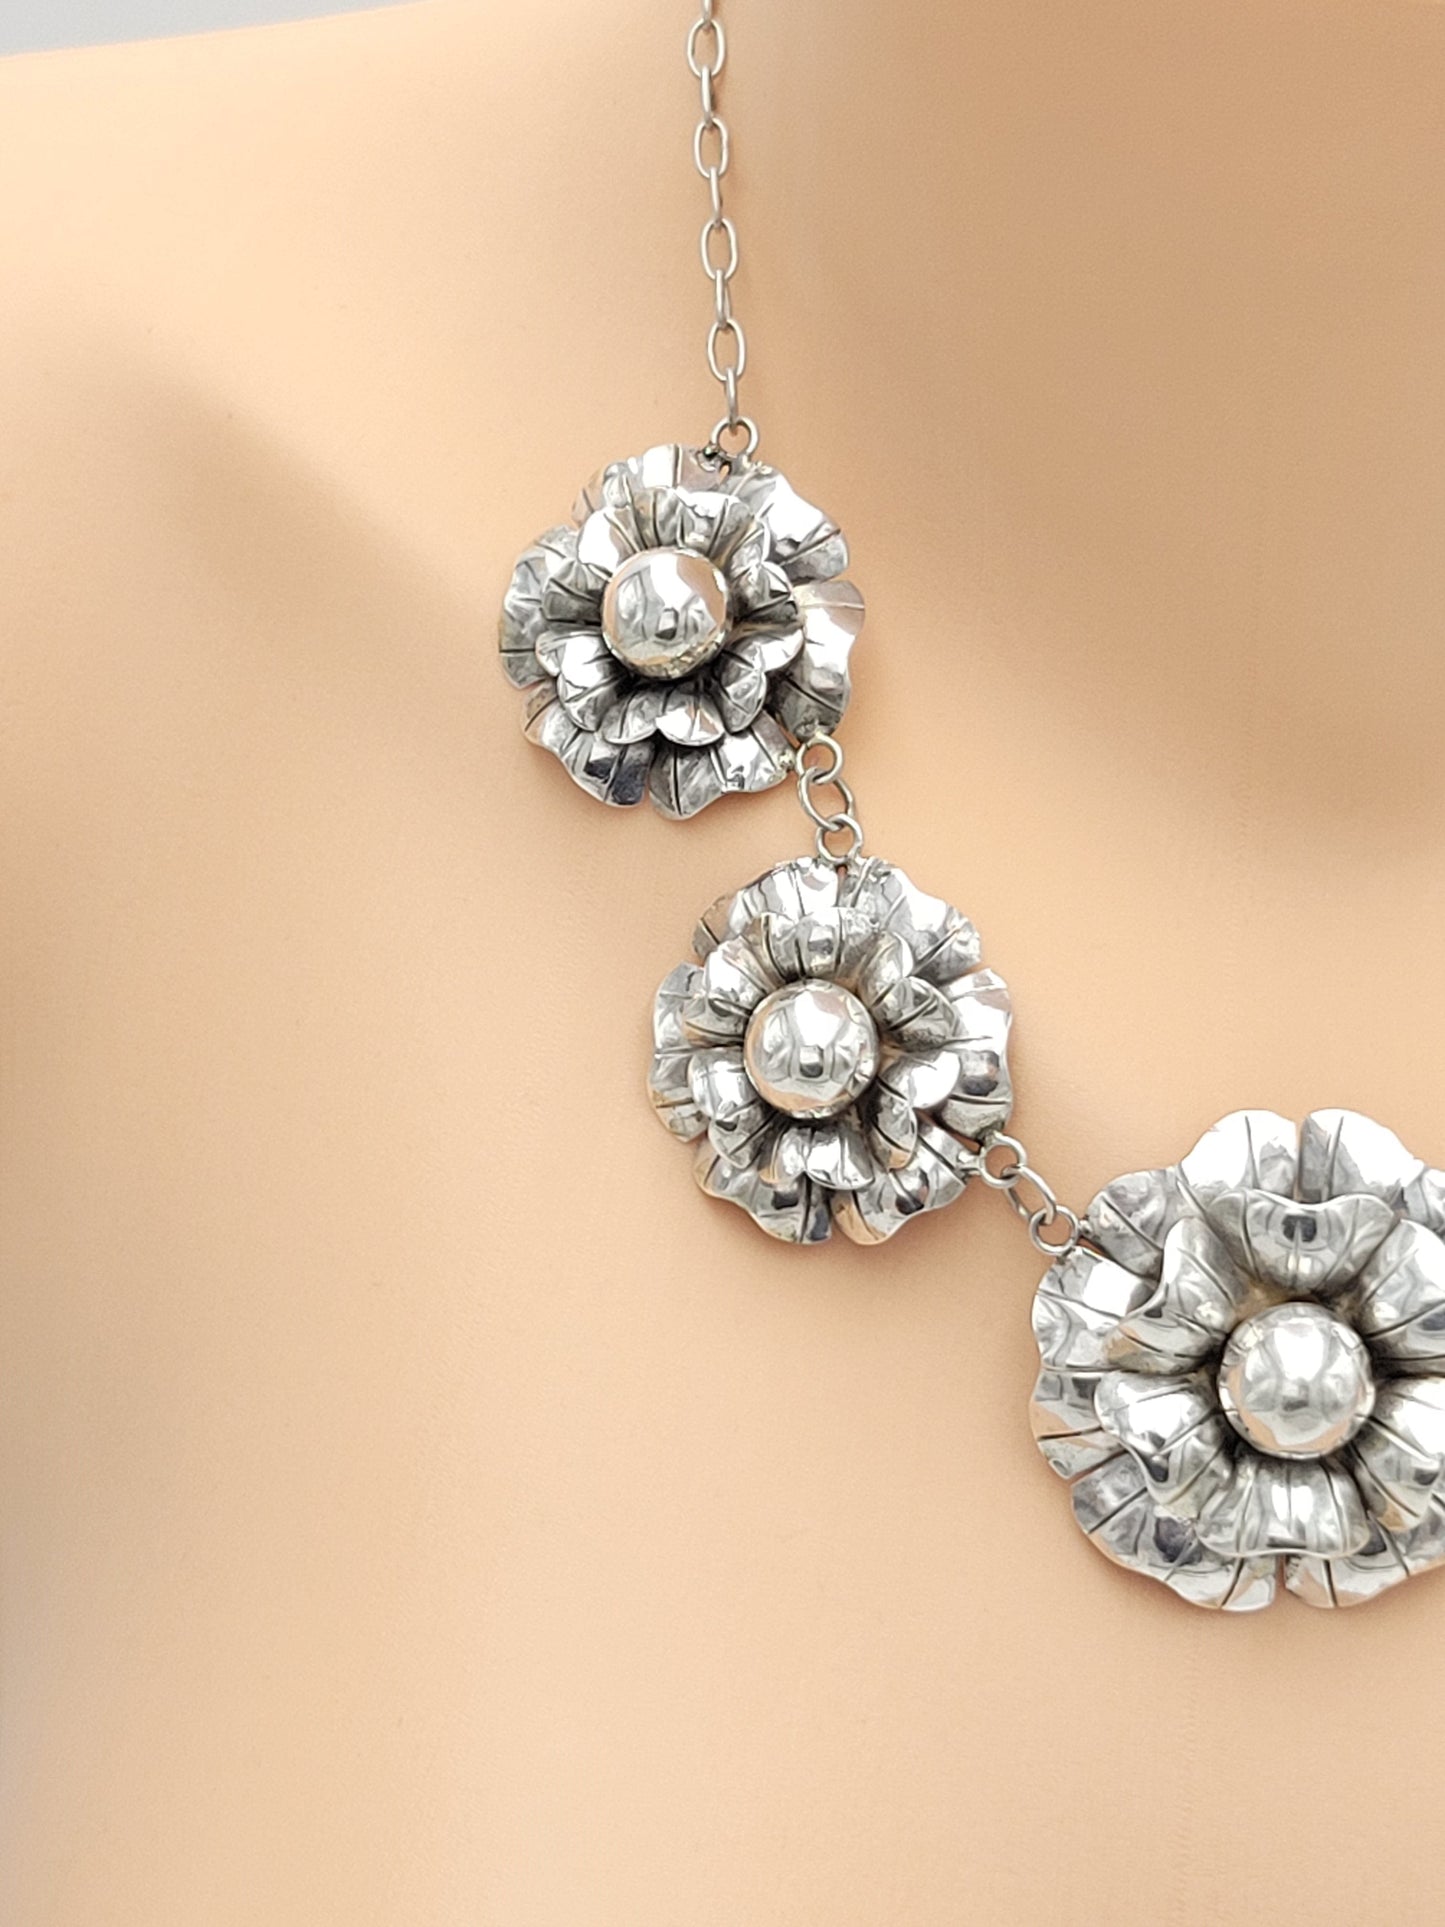 Mexico Silver Jewelry Designer Mexico Sterling 3D Blooming Flowers Necklace Early 20th Century